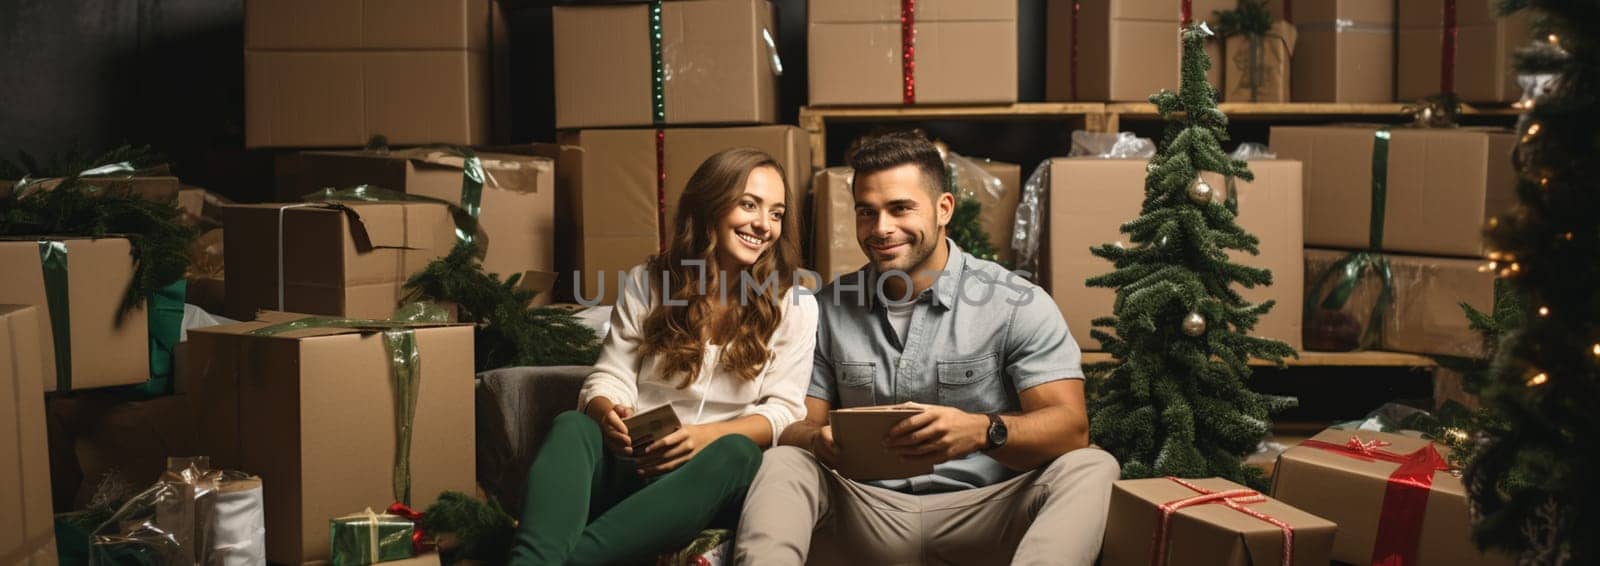 Relaxing in new house. Cheerful young couple sitting on the floor while cardboard boxes laying all around them by Andelov13